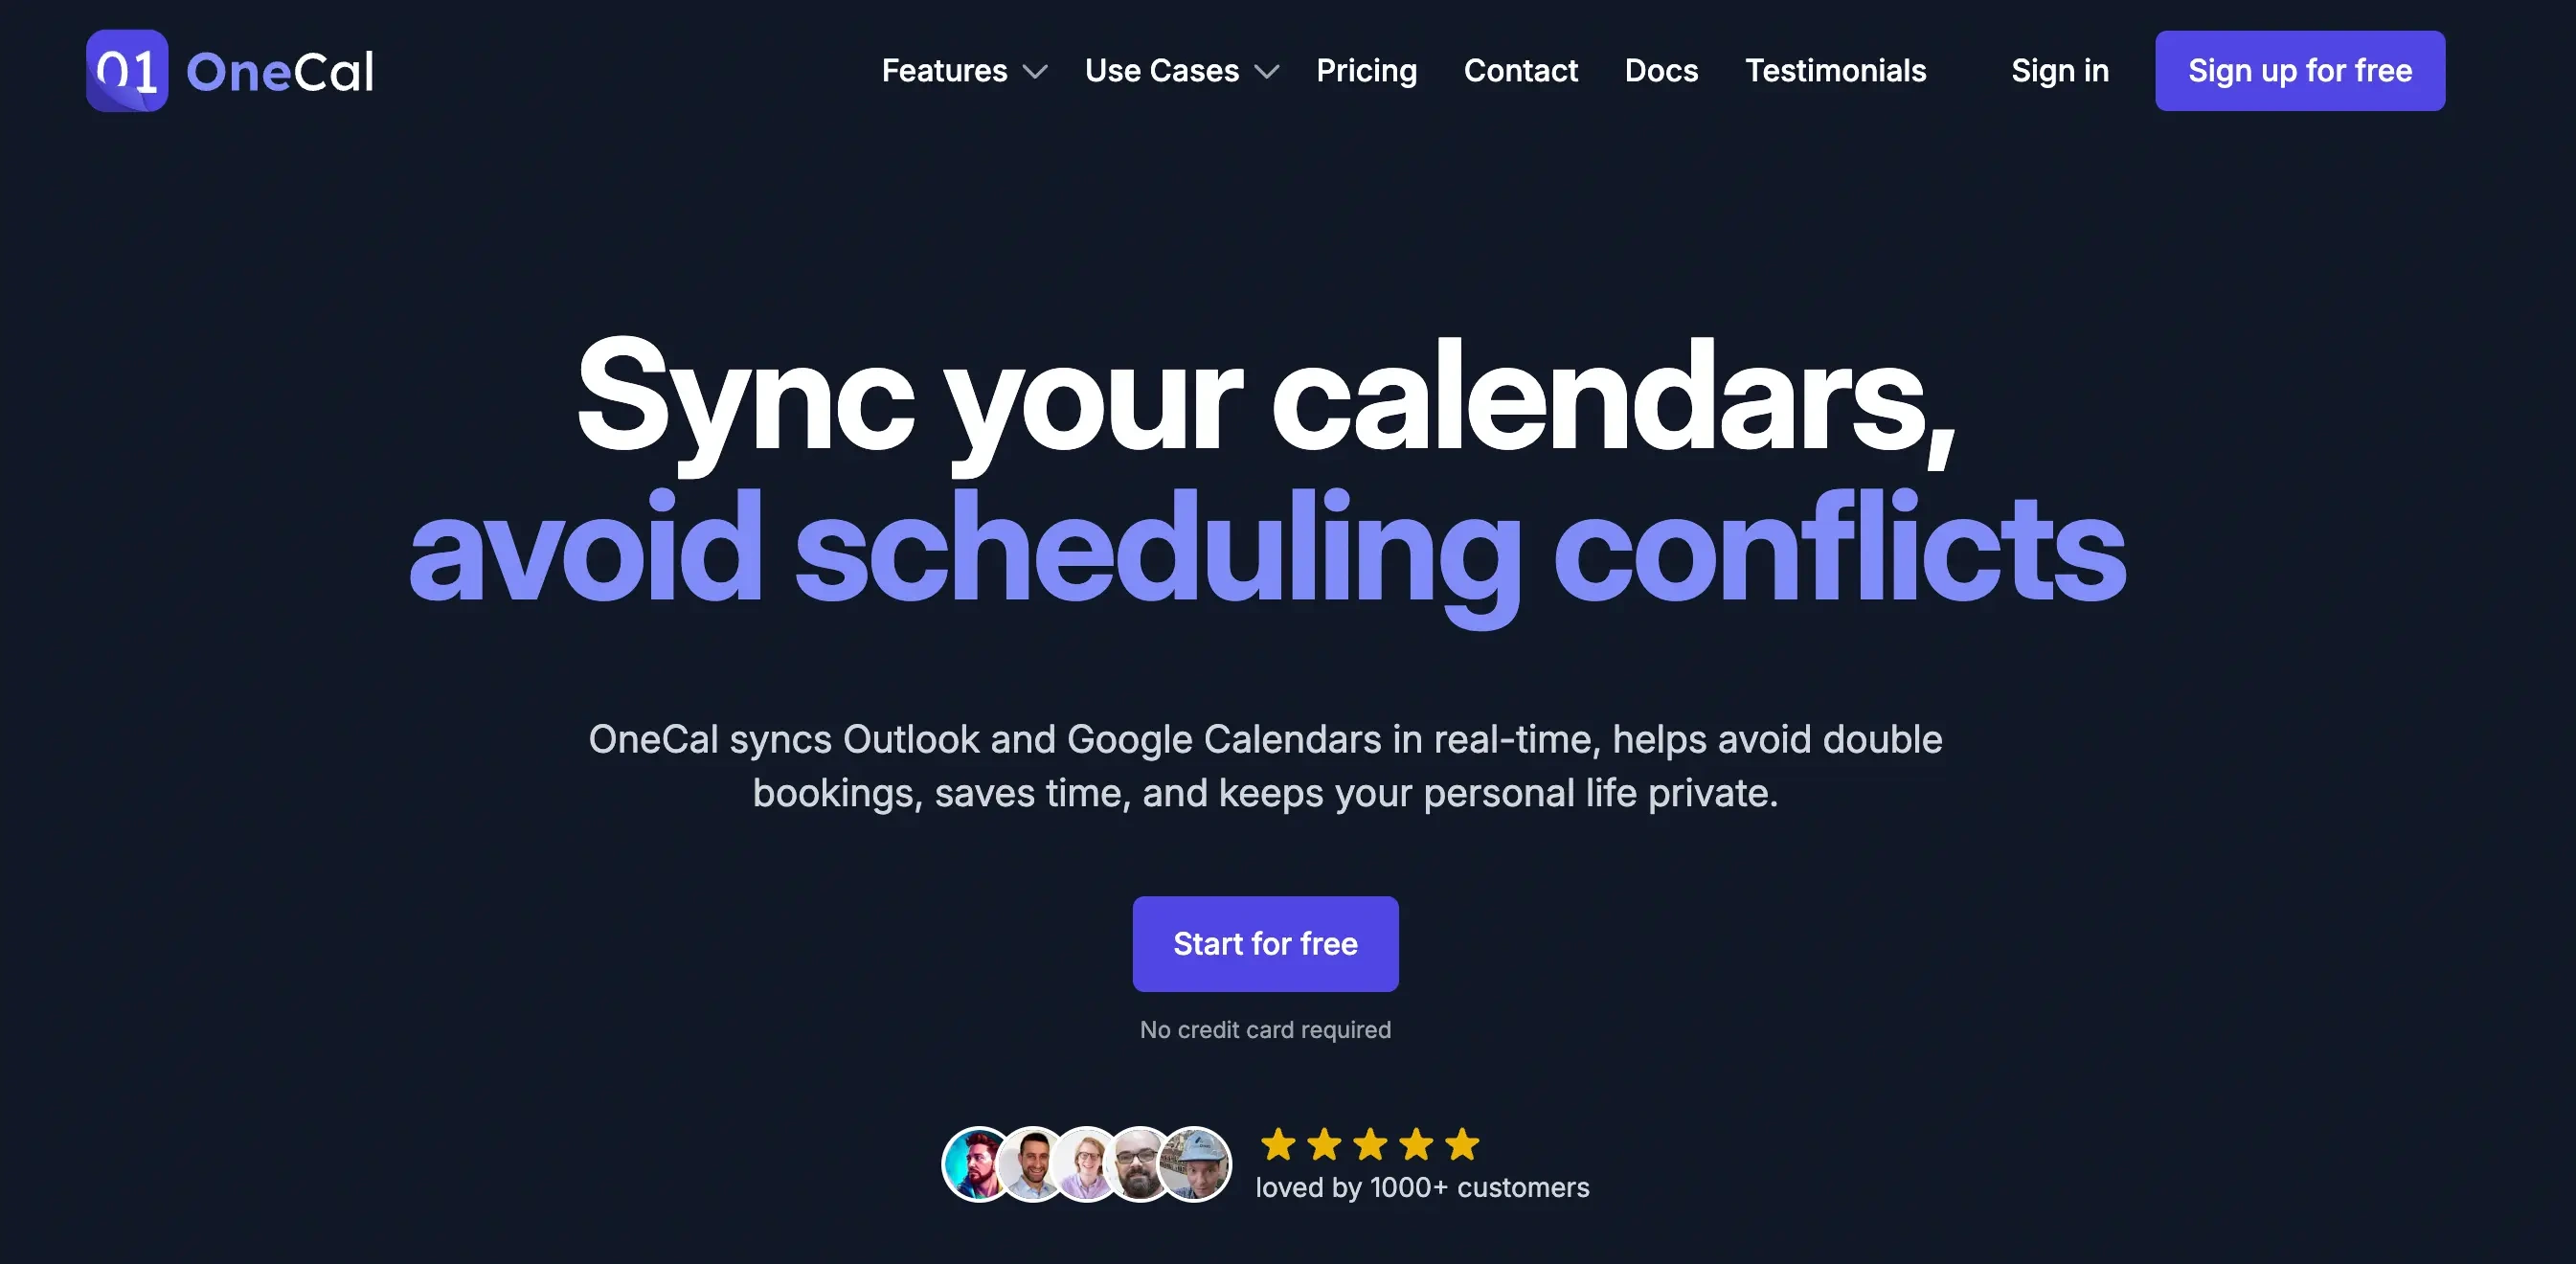 Sync your outlook and google calendars with OneCal